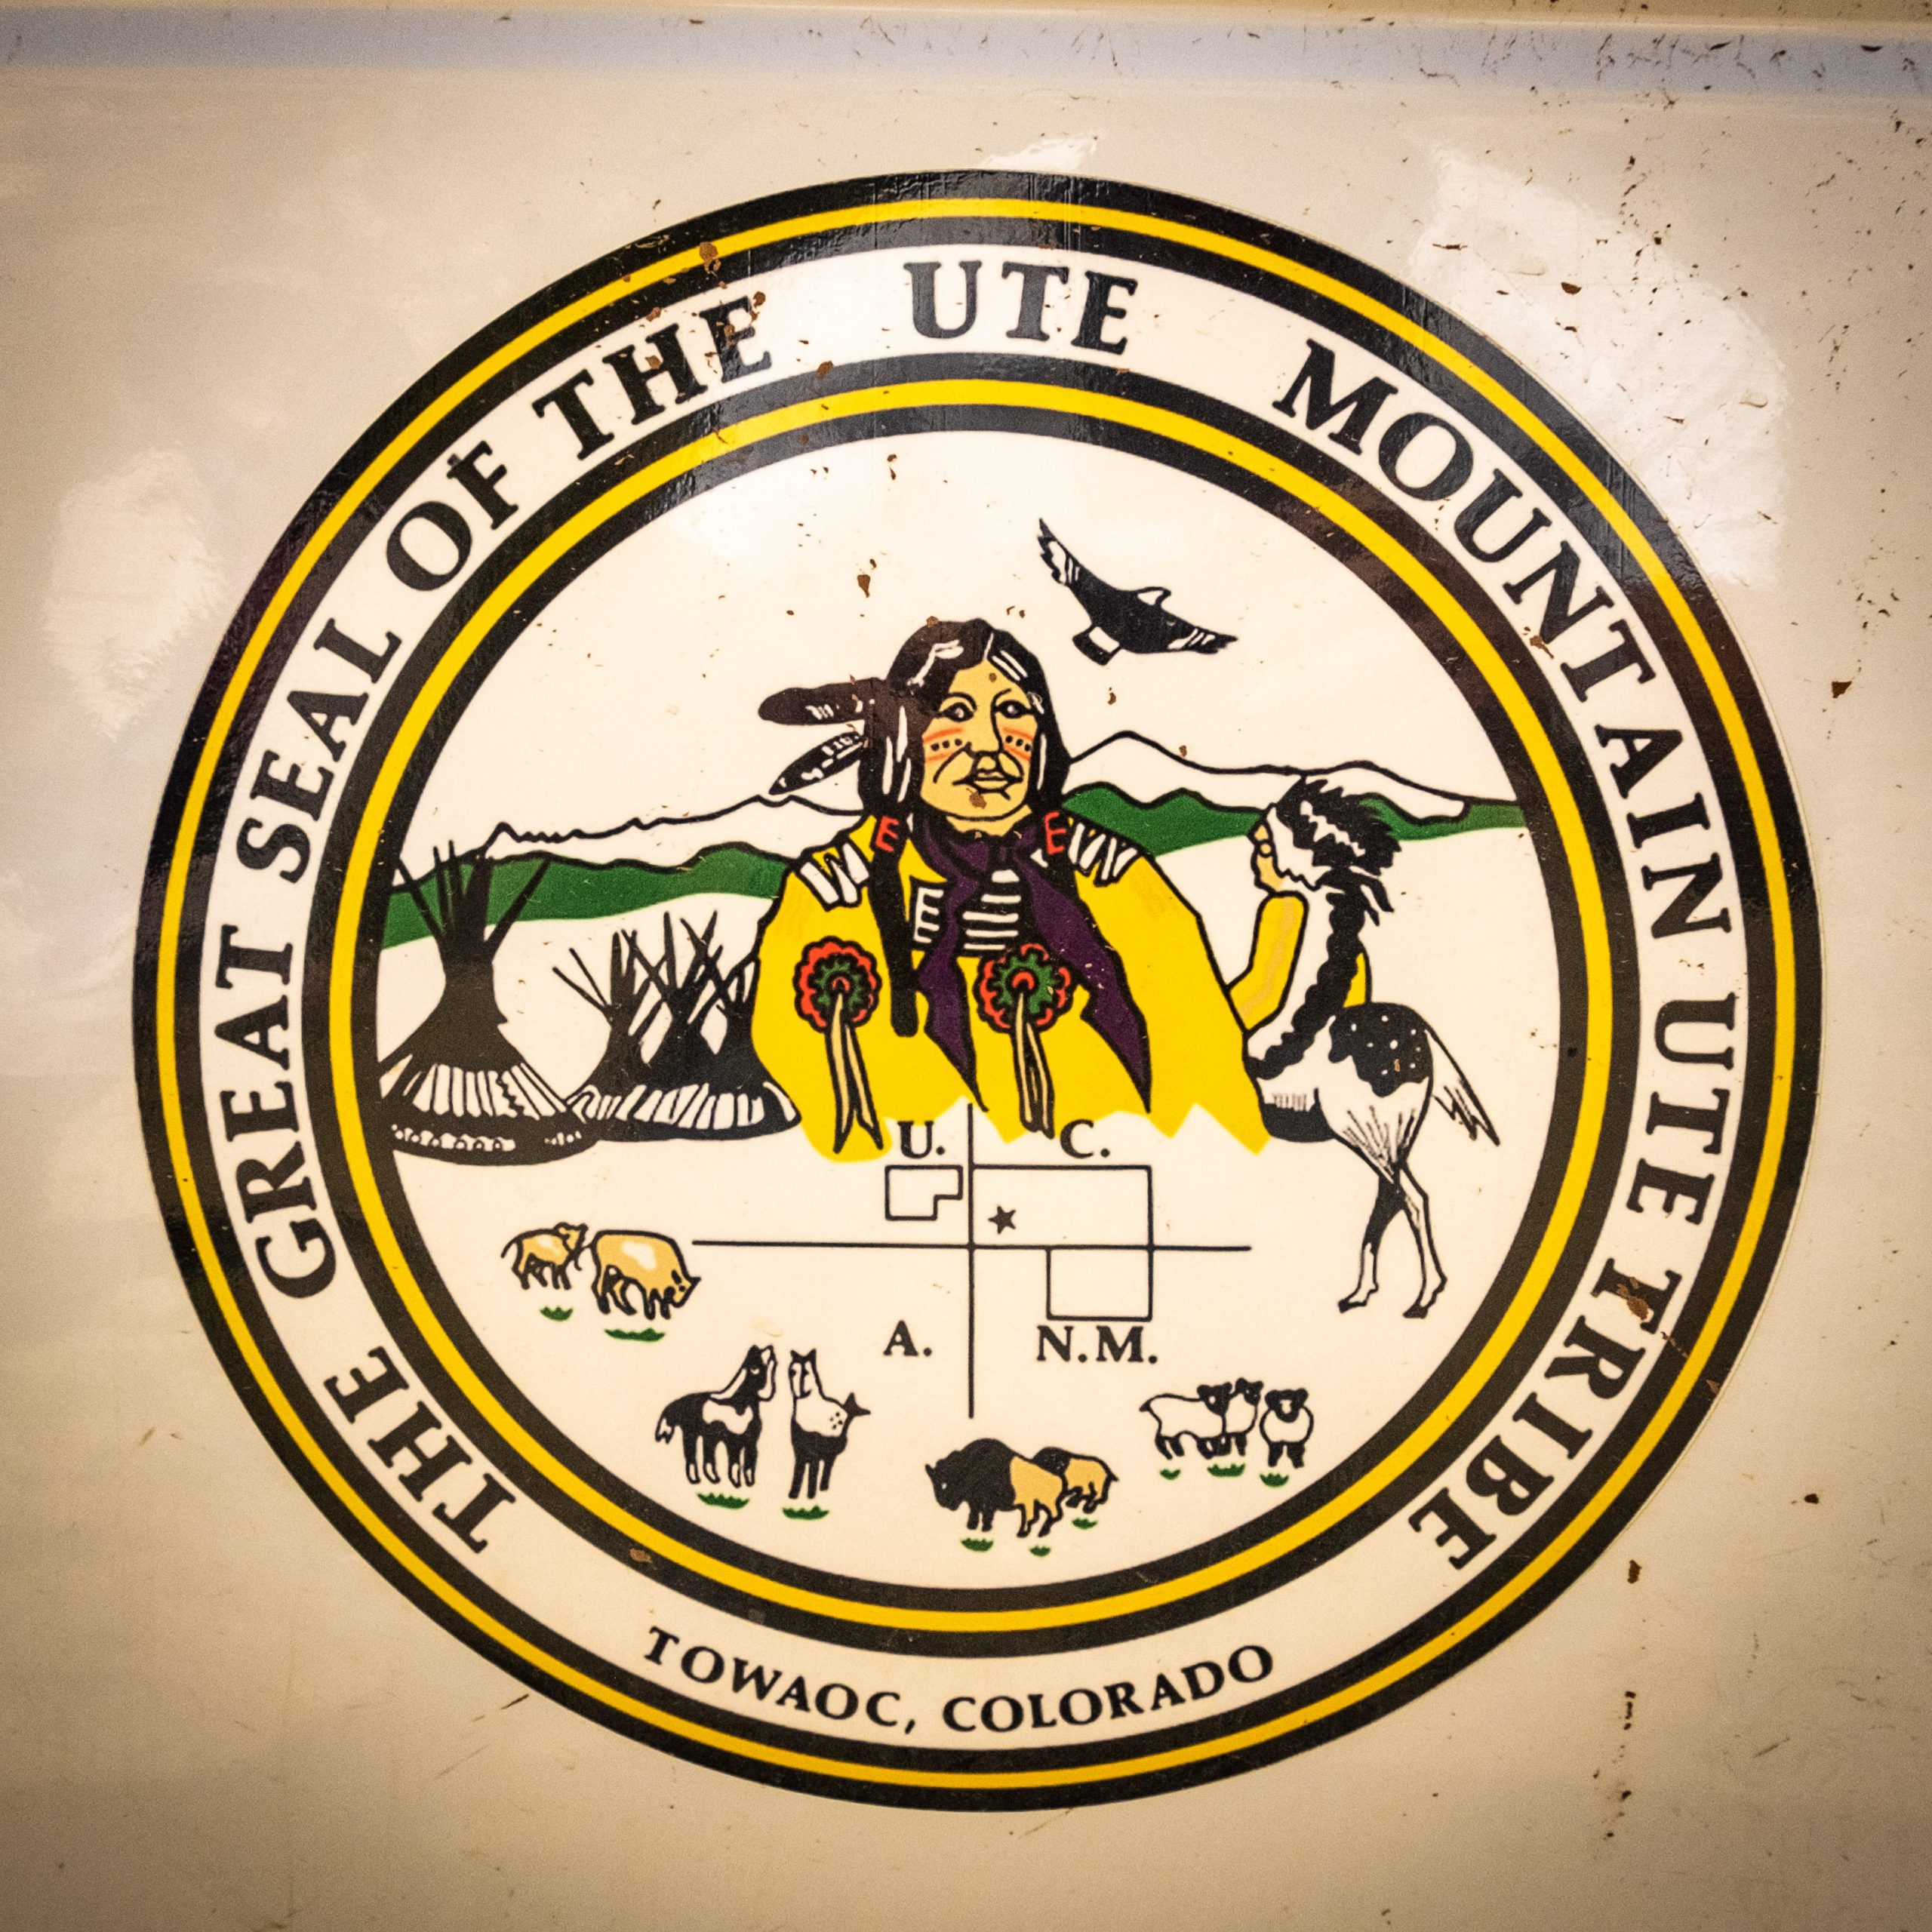 Great Seal of the Ute Mountain Ute Tribe